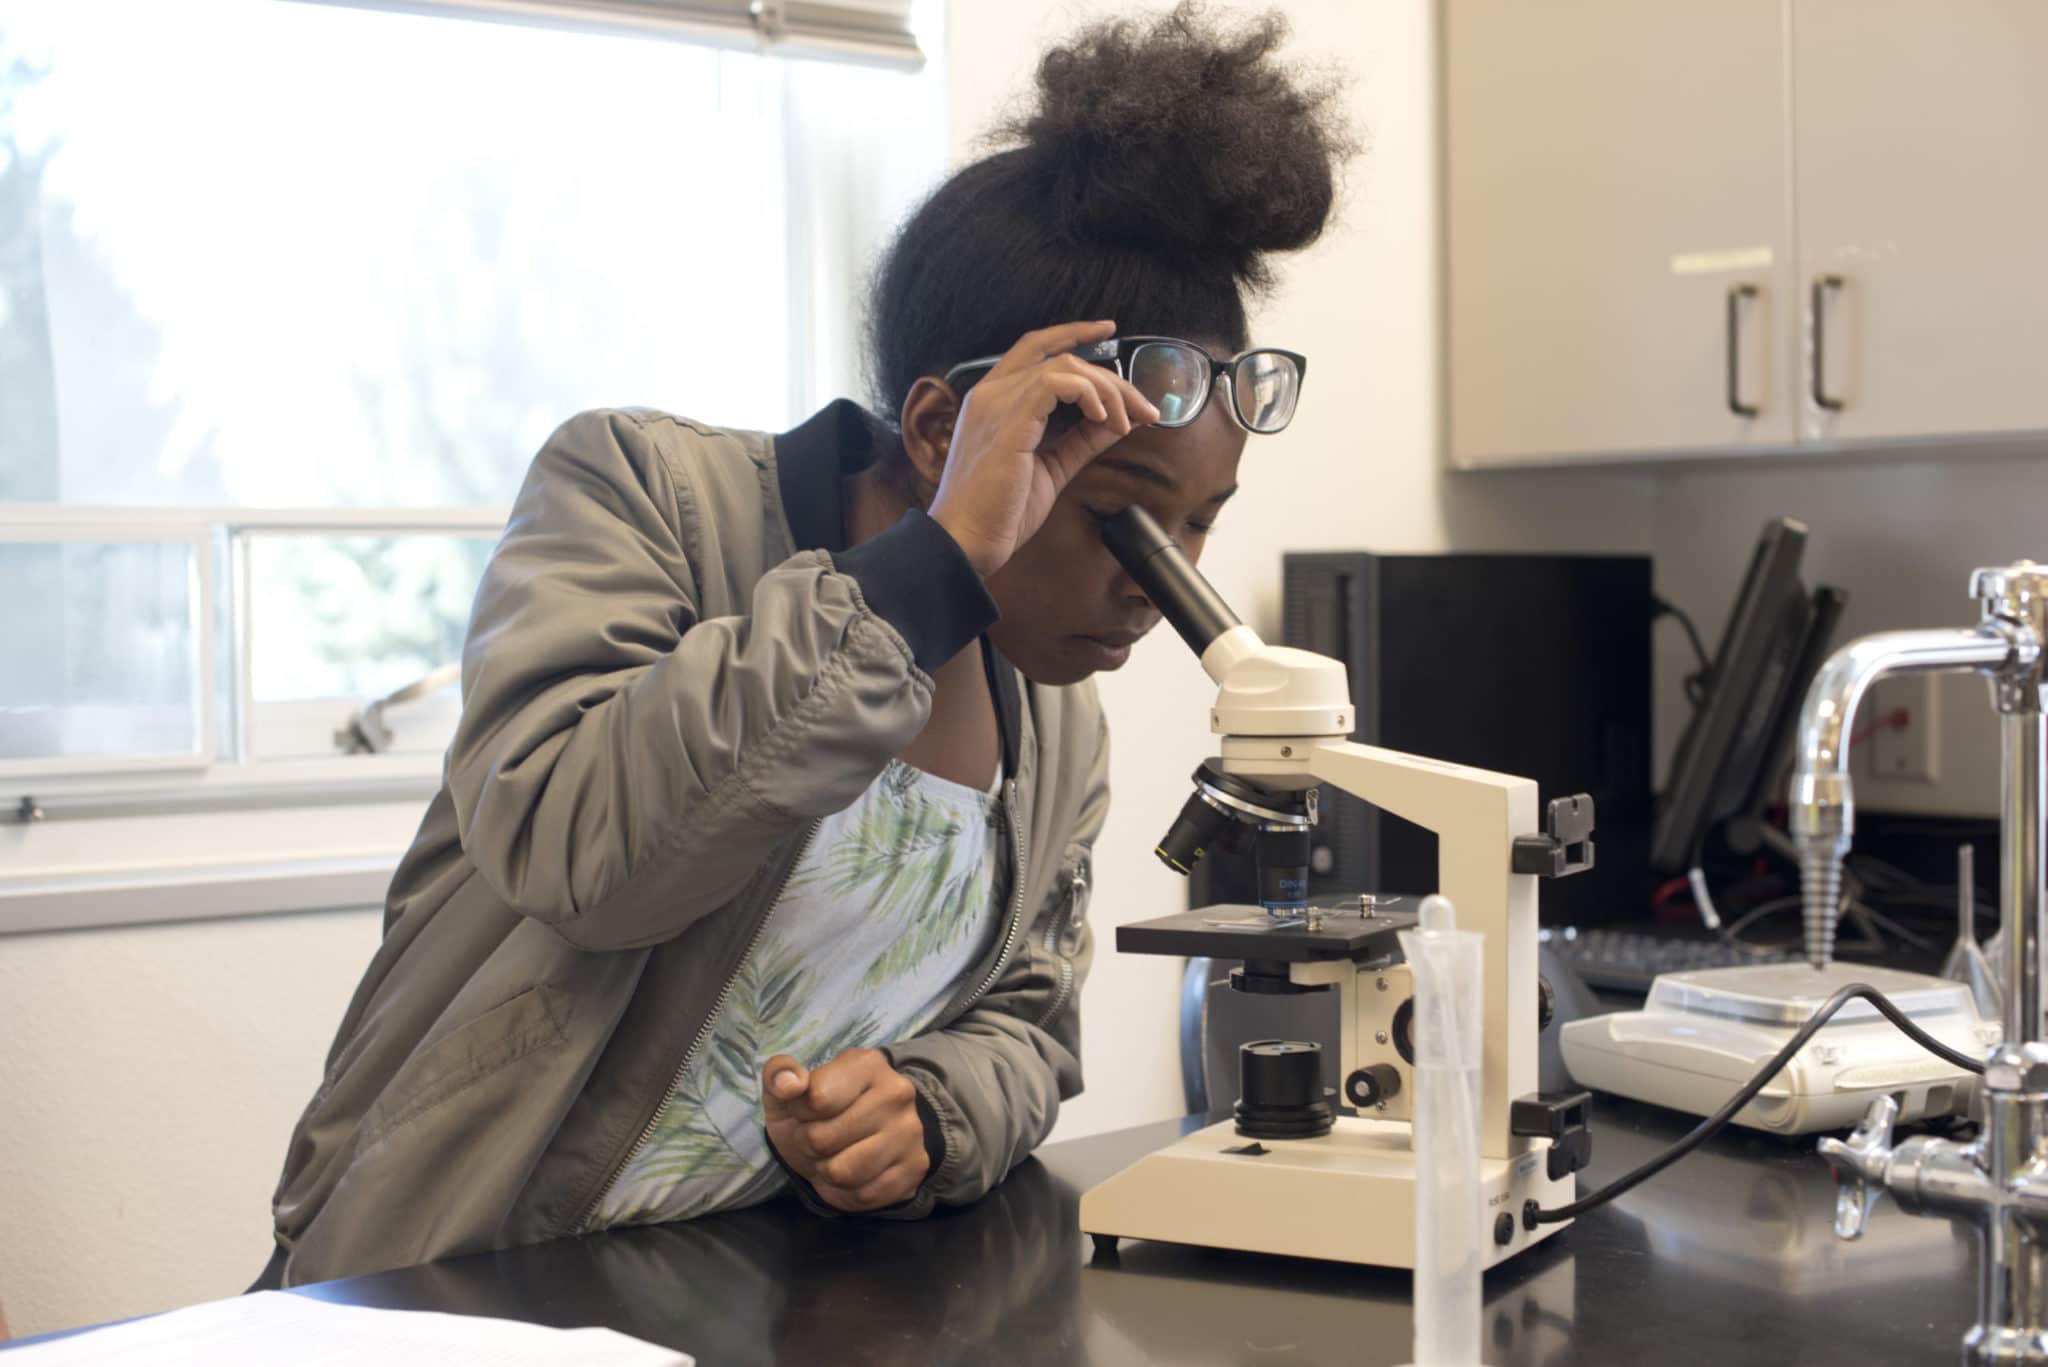 CMC Spring Valley student at her microscope.